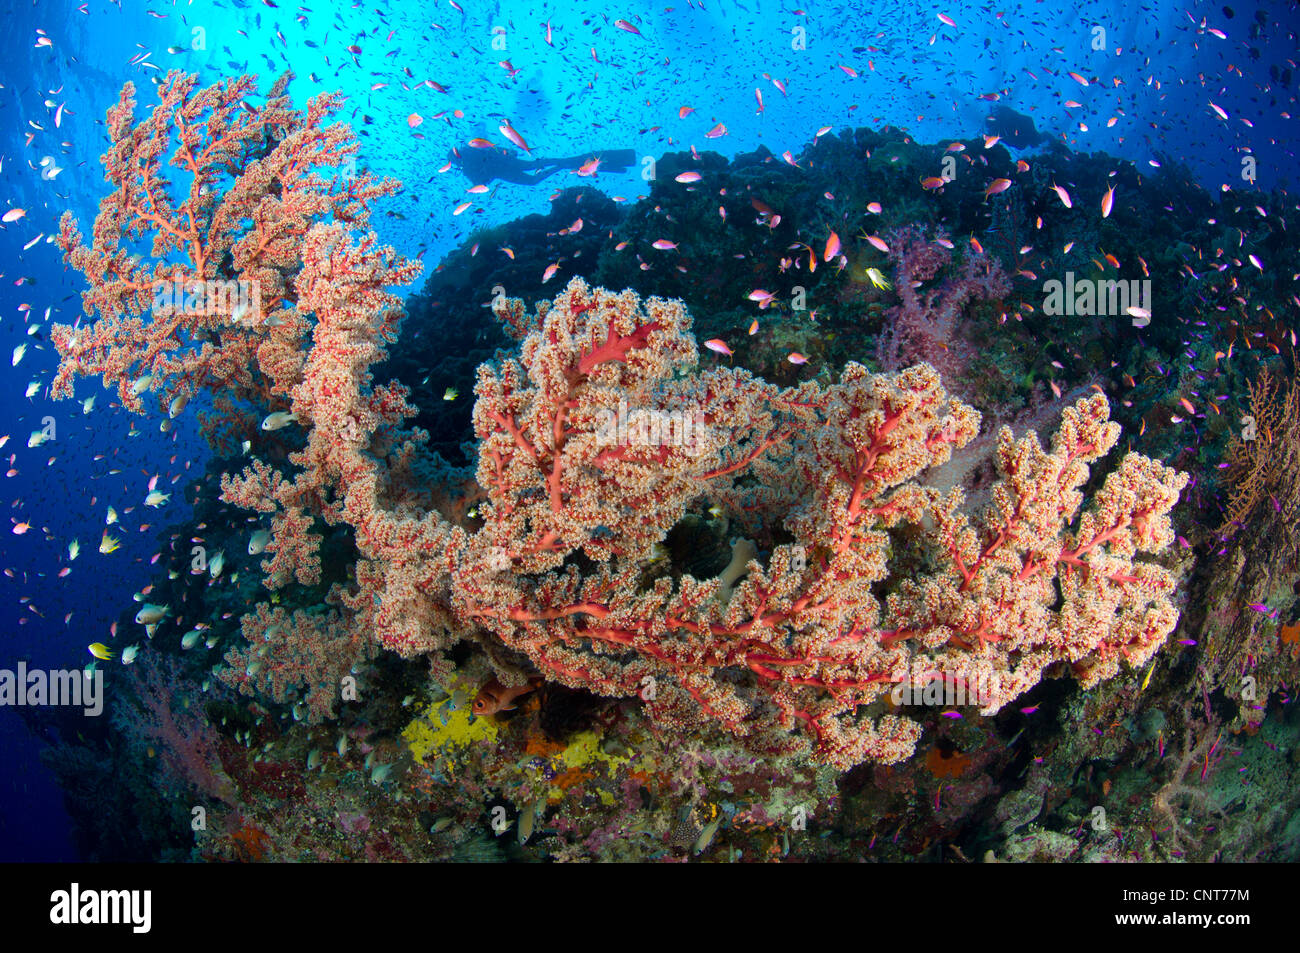 Spectacular reef scene showing sea fan with diver and anthias fish at Barney's reef, Witu Islands, Papua New Guinea. Stock Photo